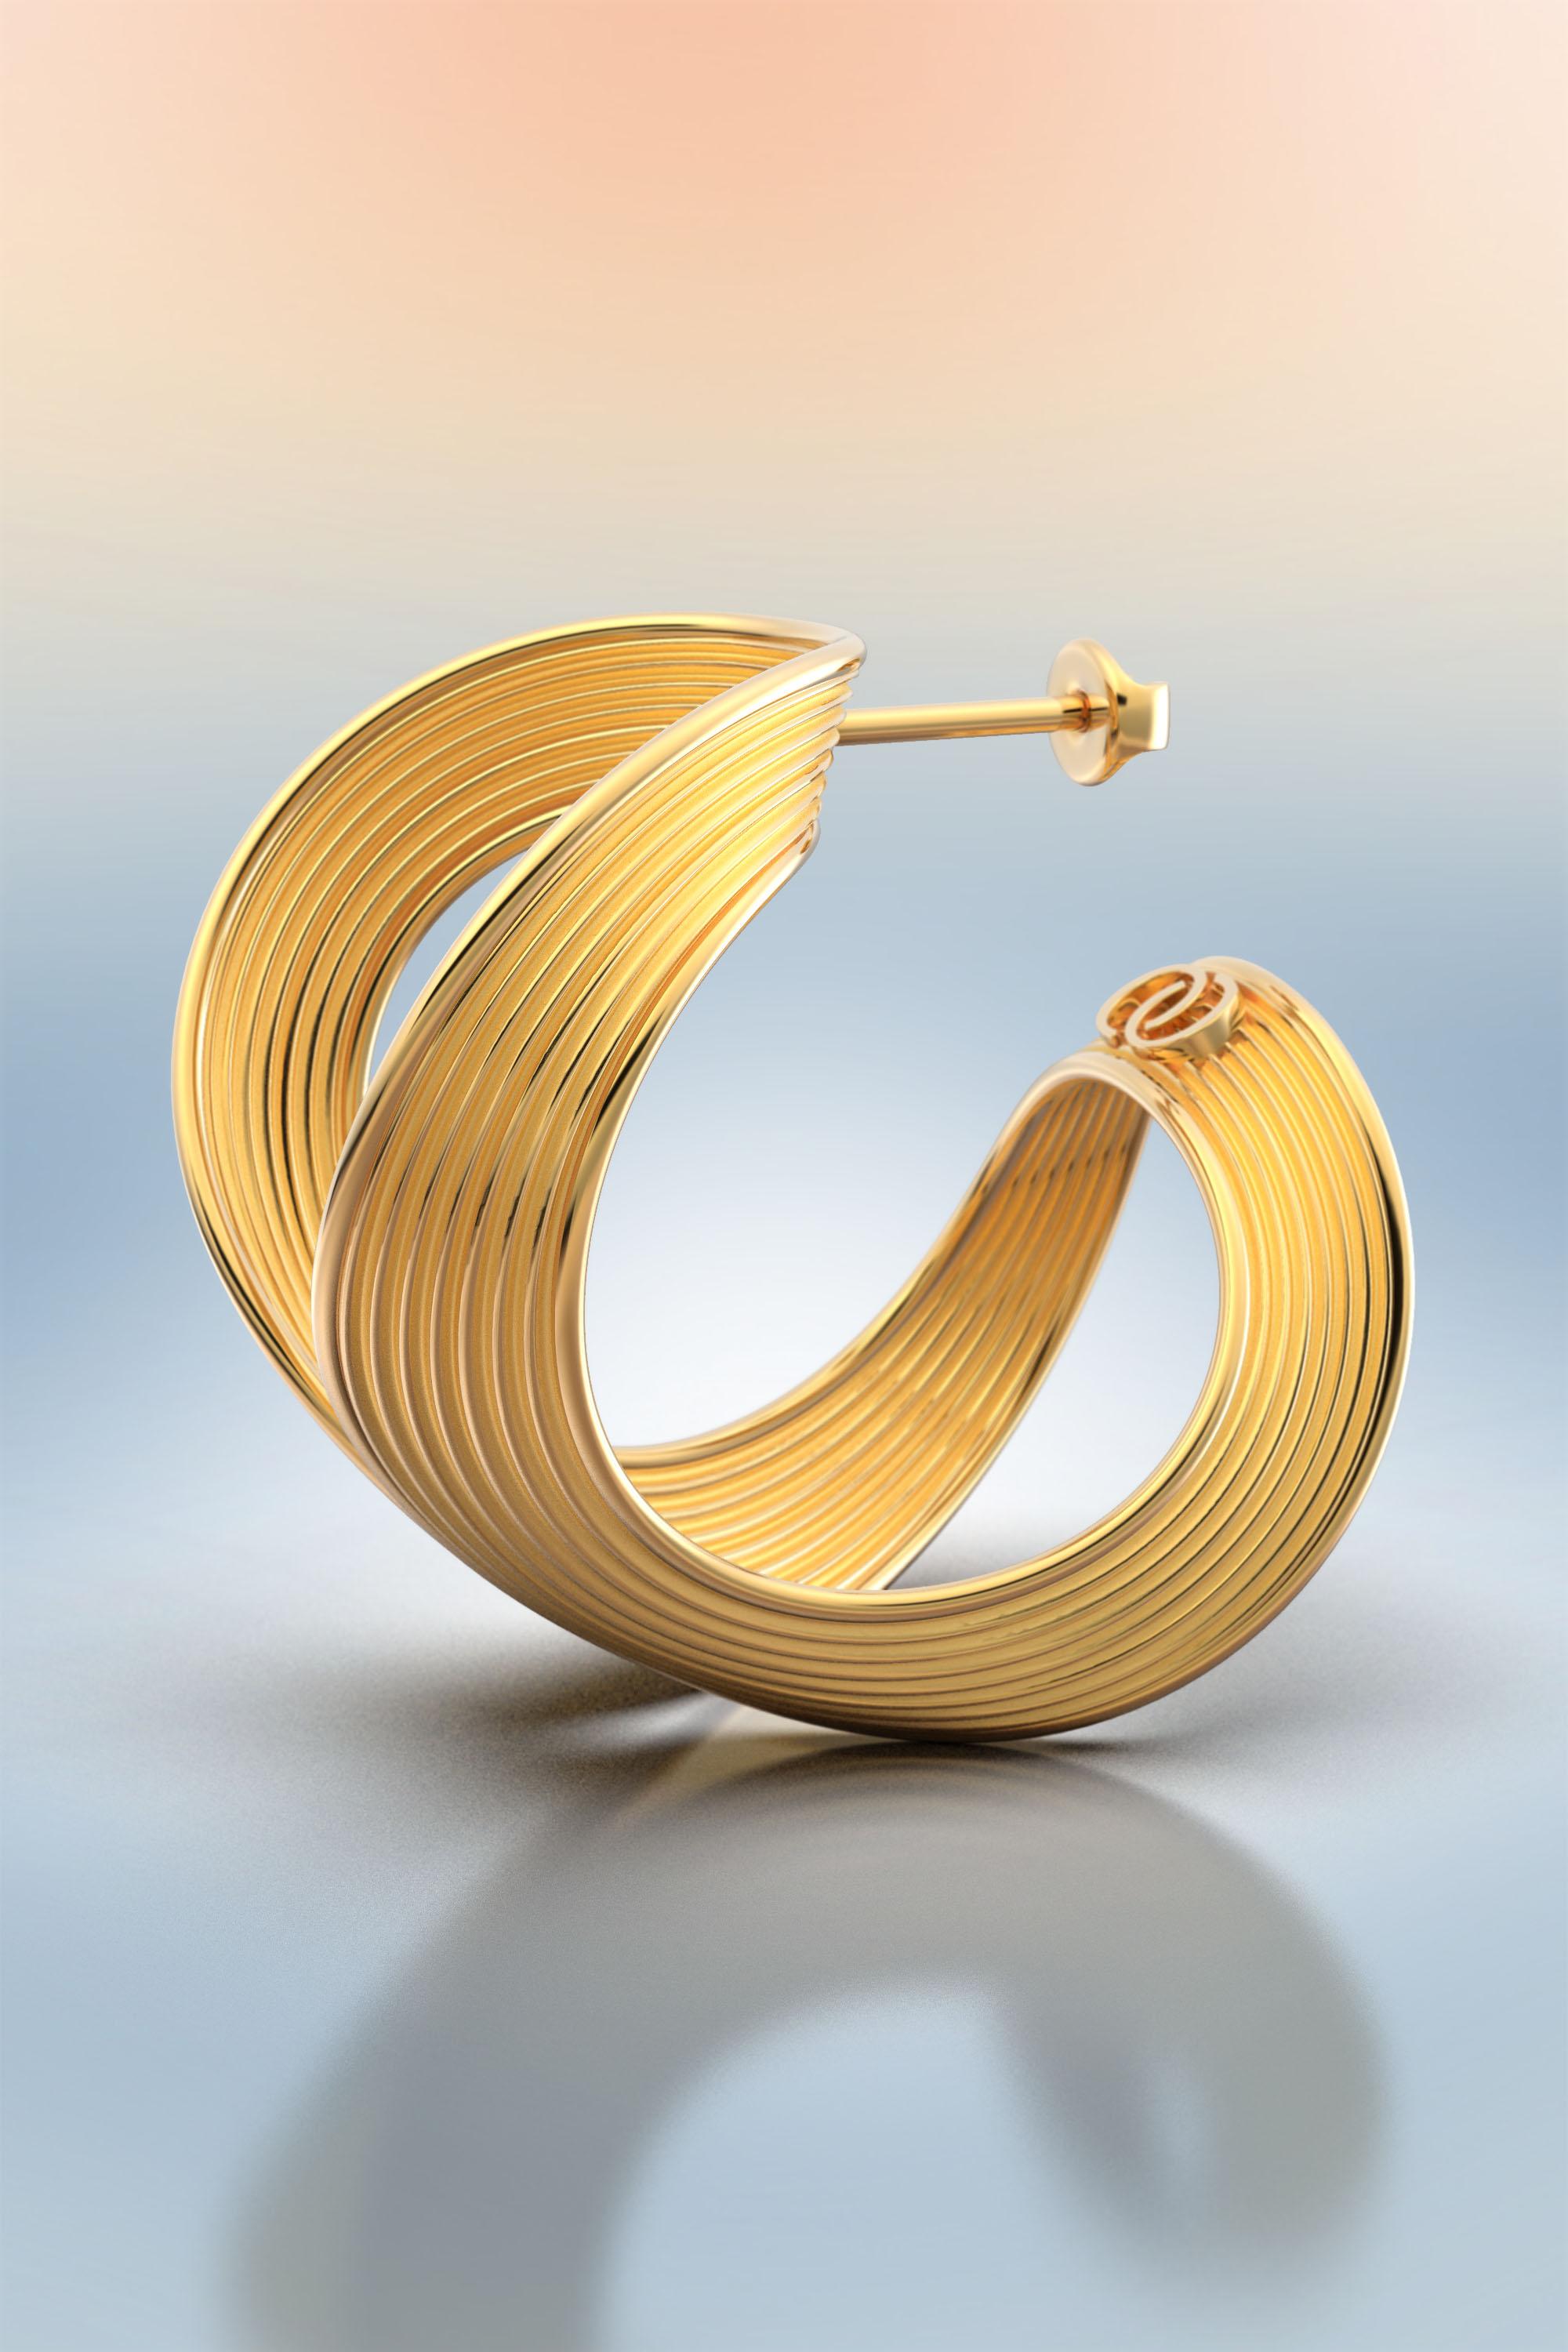 Gold Hoop Earrings, 18 Karat Large Hoops Made in Italy by Oltremare Gioielli In New Condition For Sale In Camisano Vicentino, VI